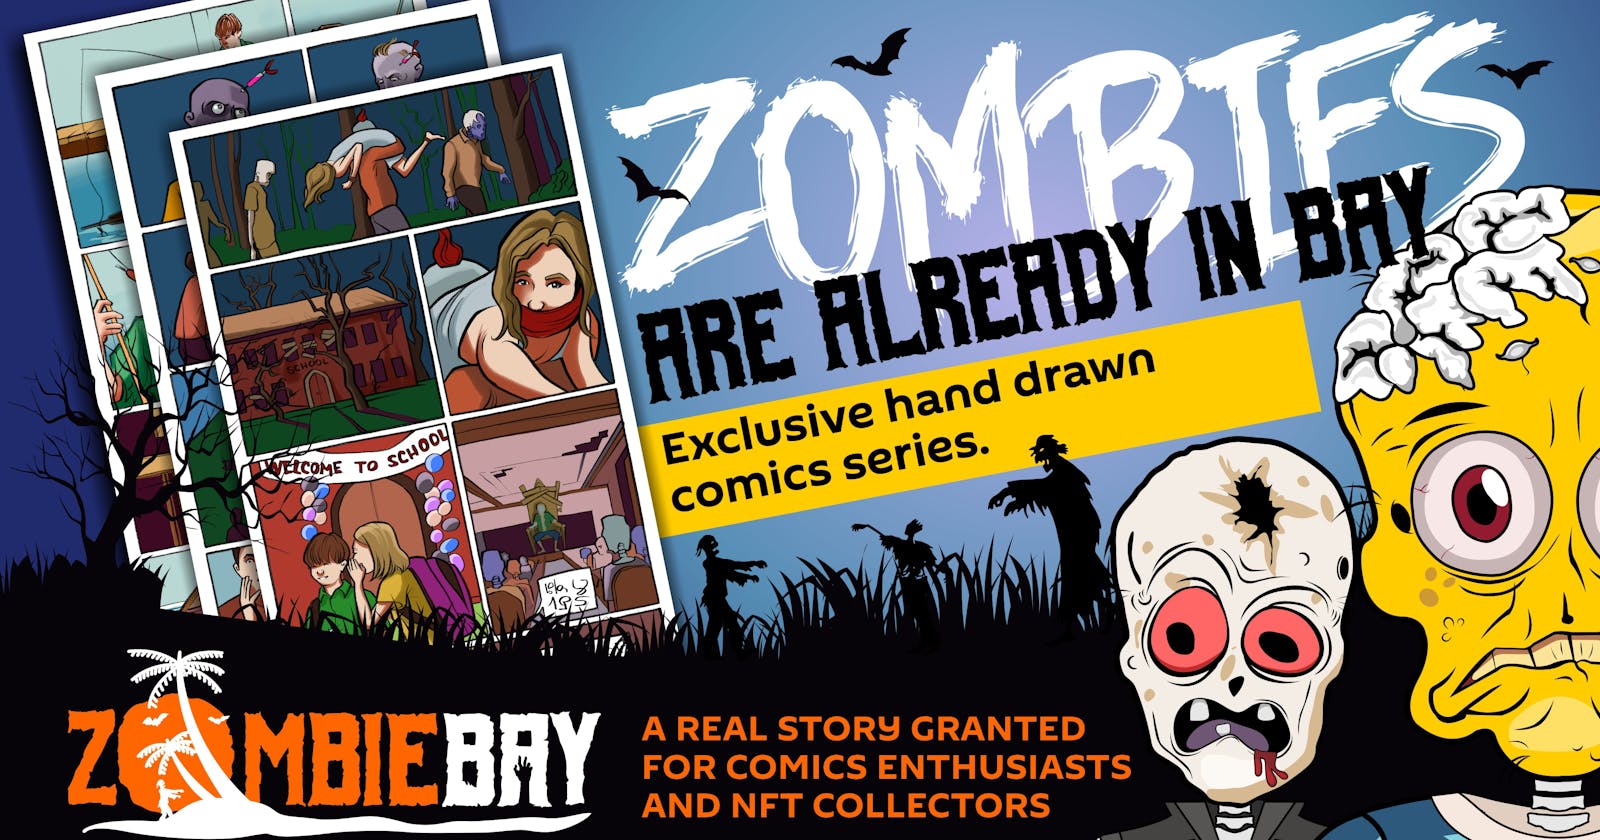 Exclusive hand drawn comics series with NFT Zombiebay collection based on real story granted for collectors